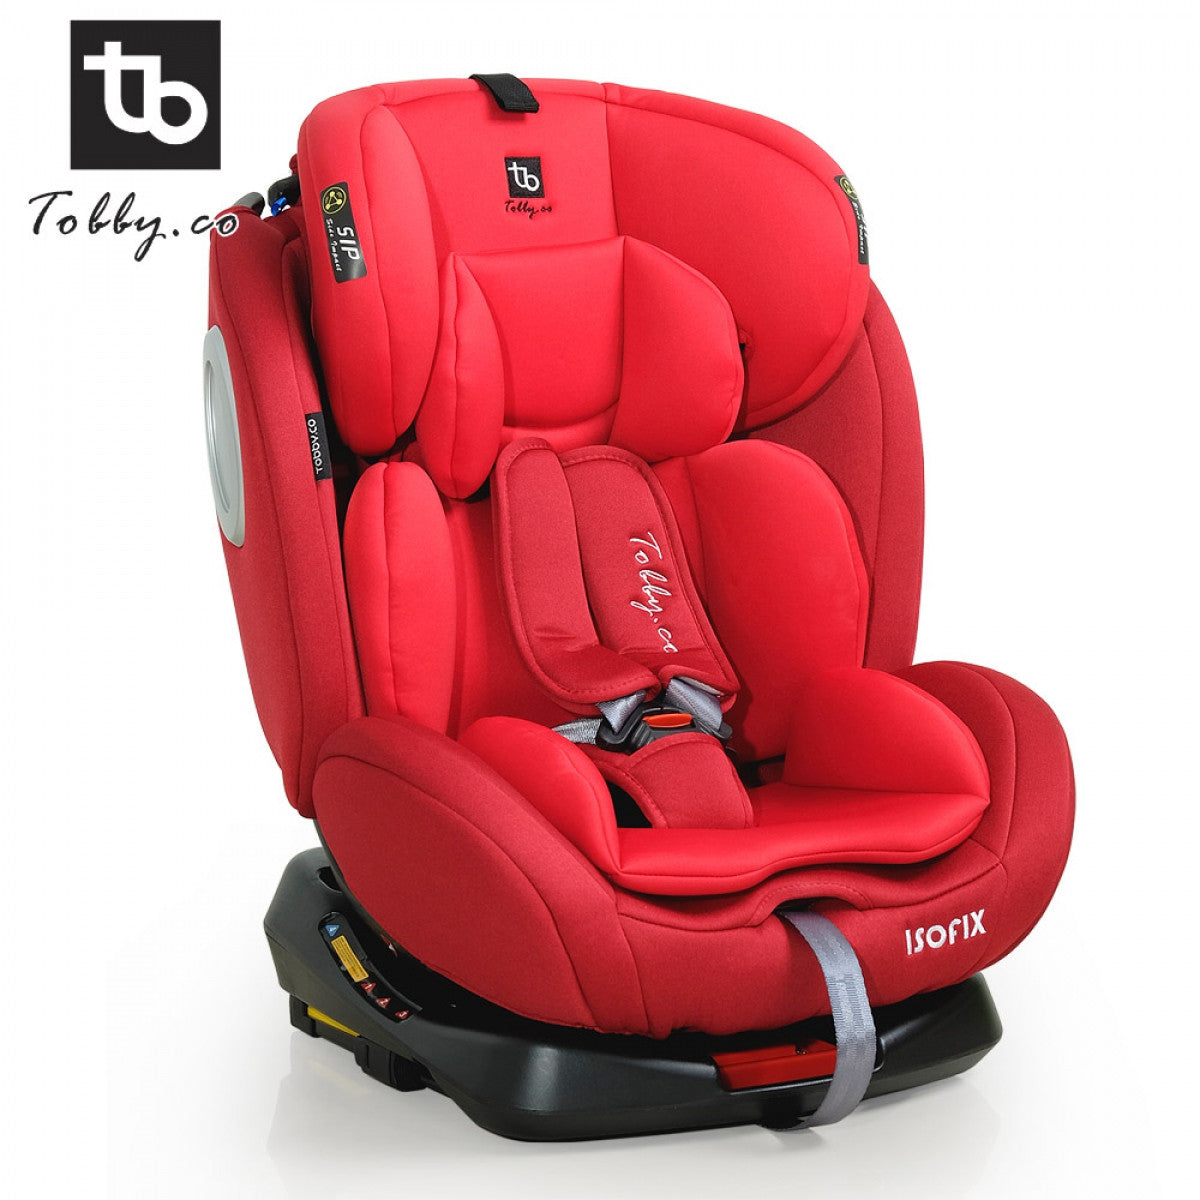 Tobby My Dear Belt/Isofix 360 Degrees Convertible Child Safety Car Seat 30035